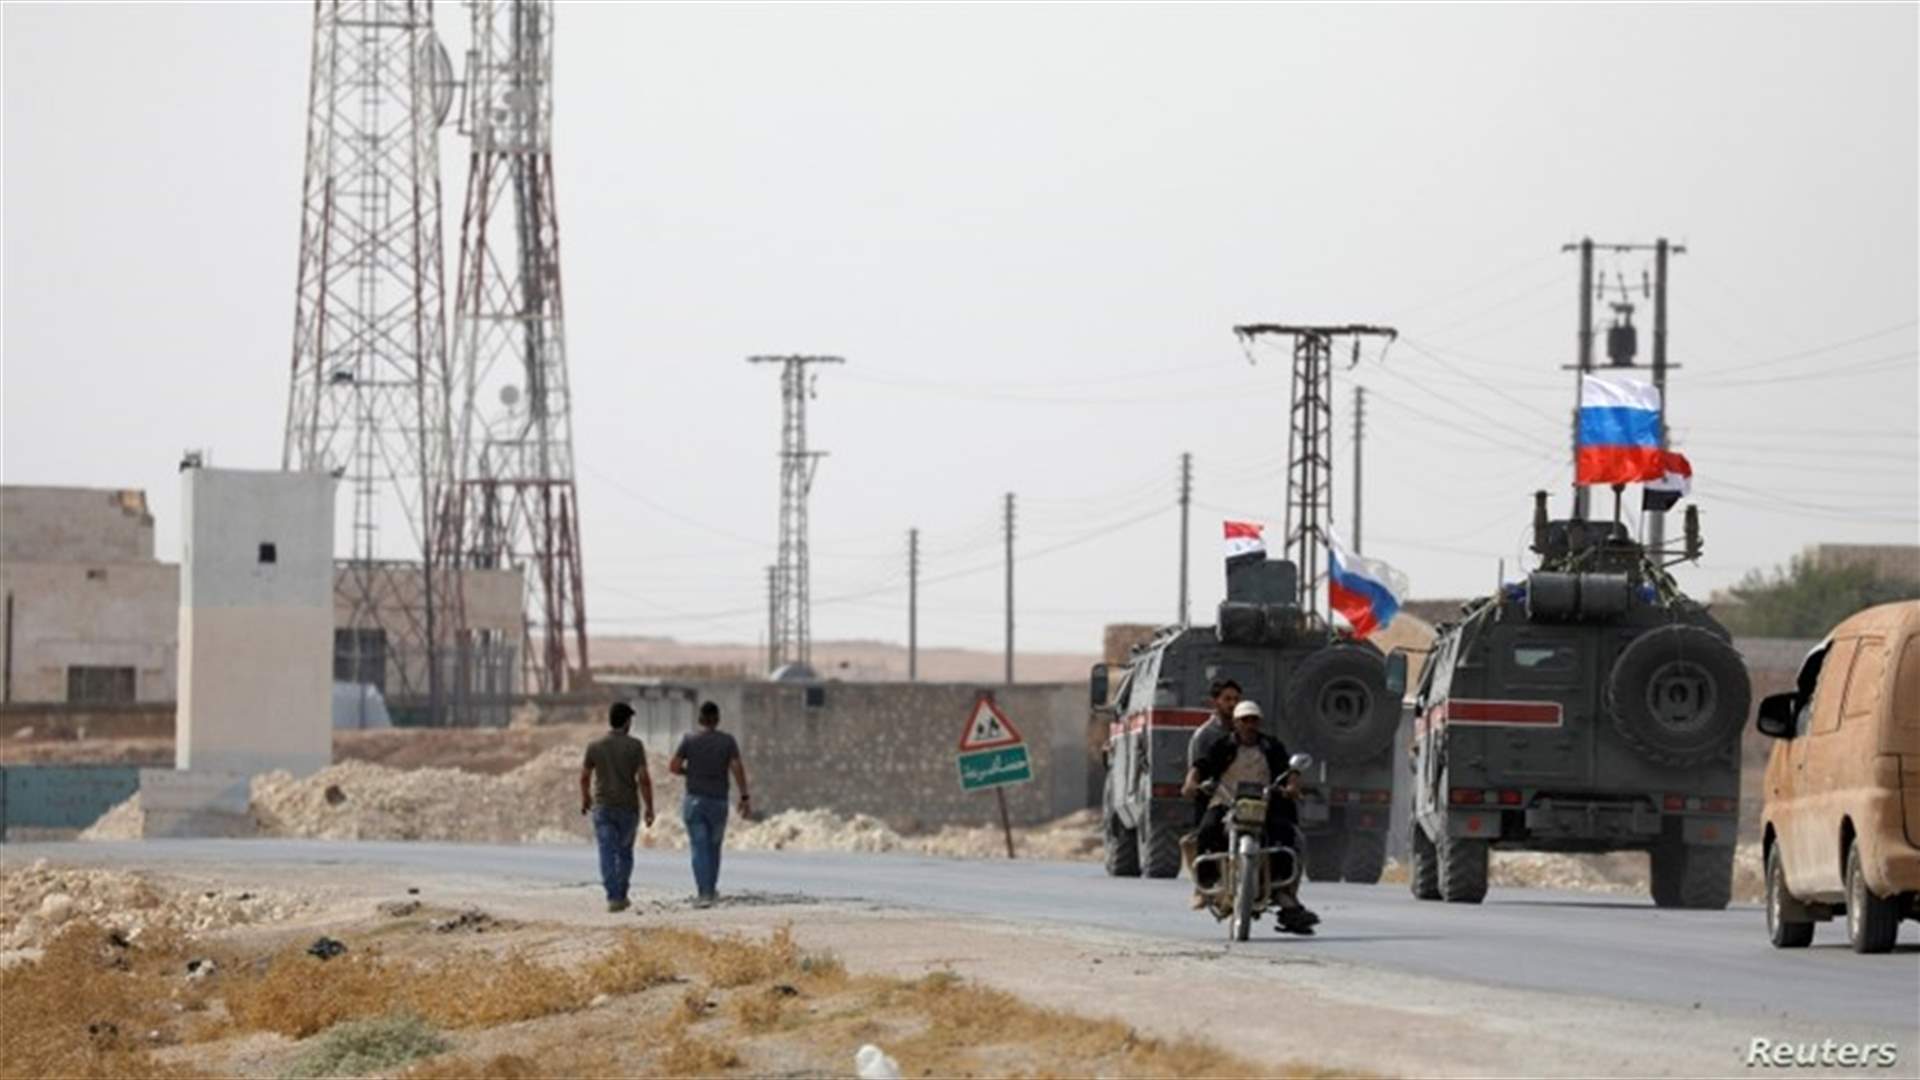 Syrian Observatory: Russian forces cross Euphrates, reach area outside Kobani in northern Syria